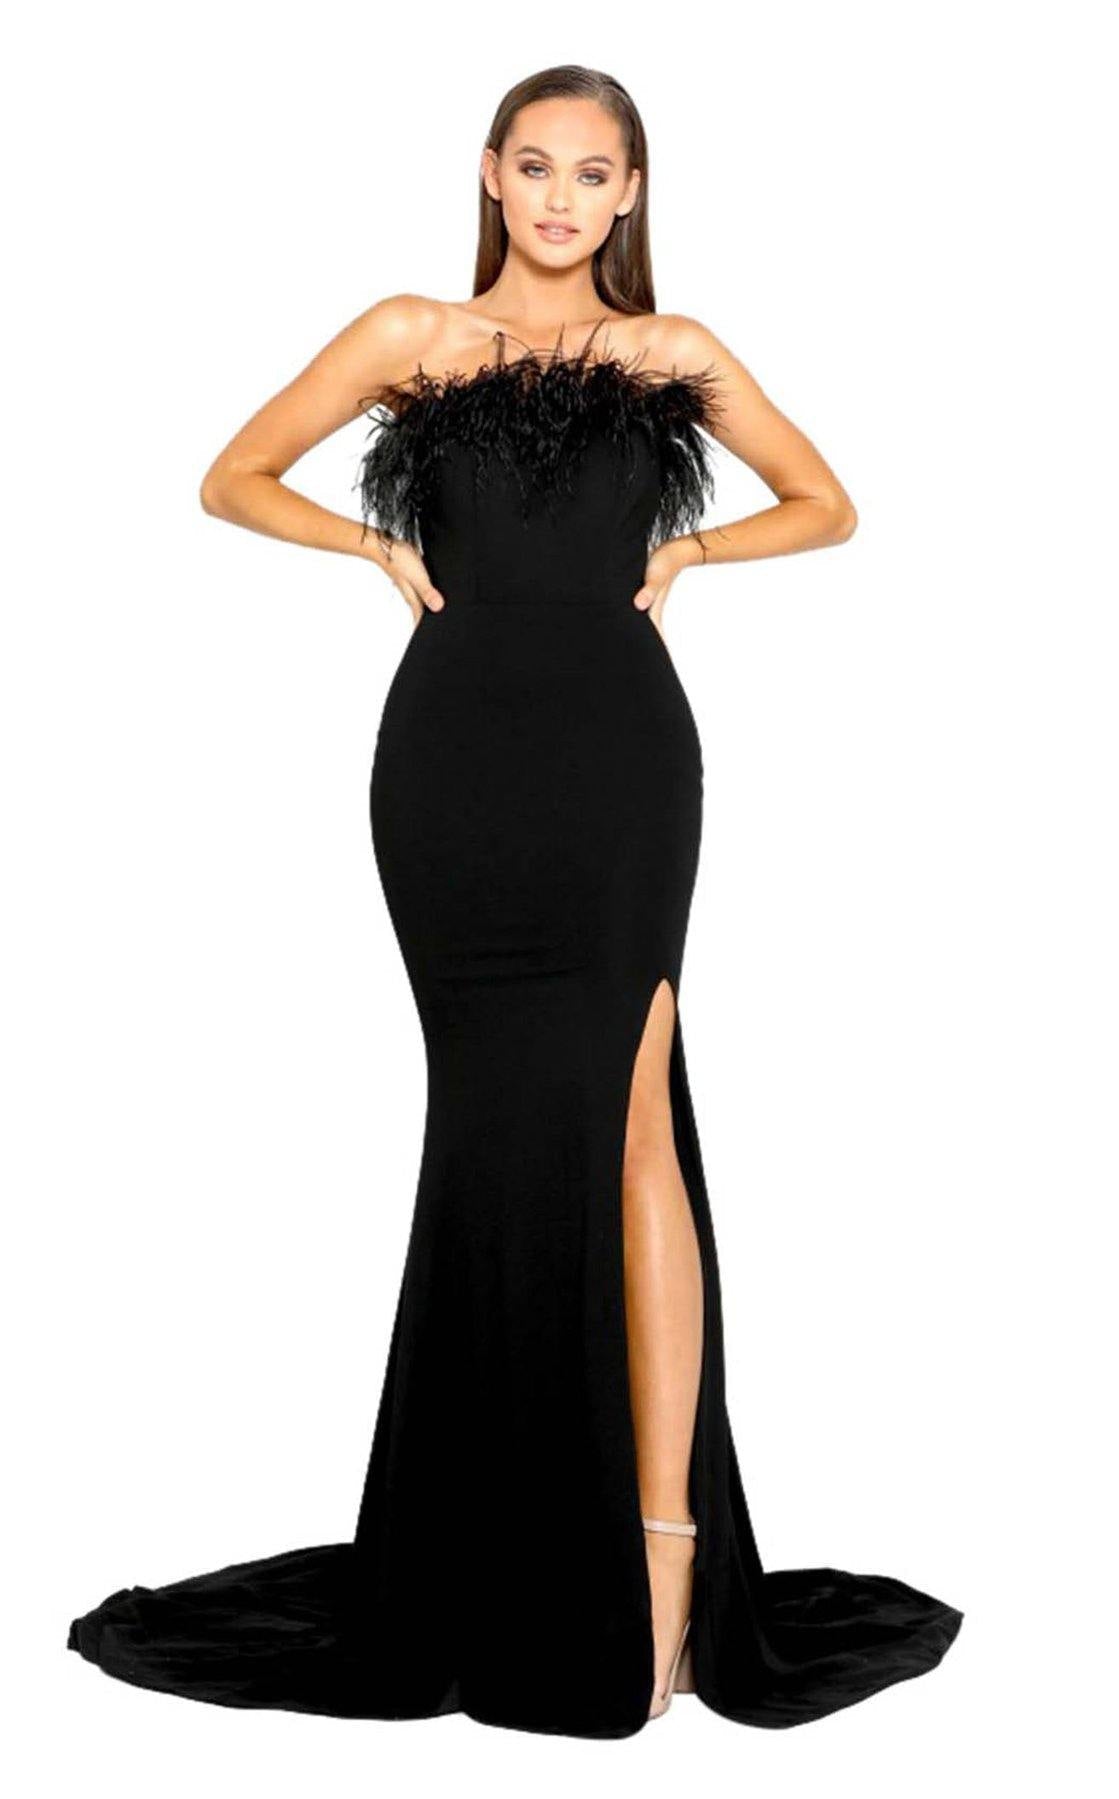 Find the perfect Black Wedding Dress for your big day! – The Dress Outlet